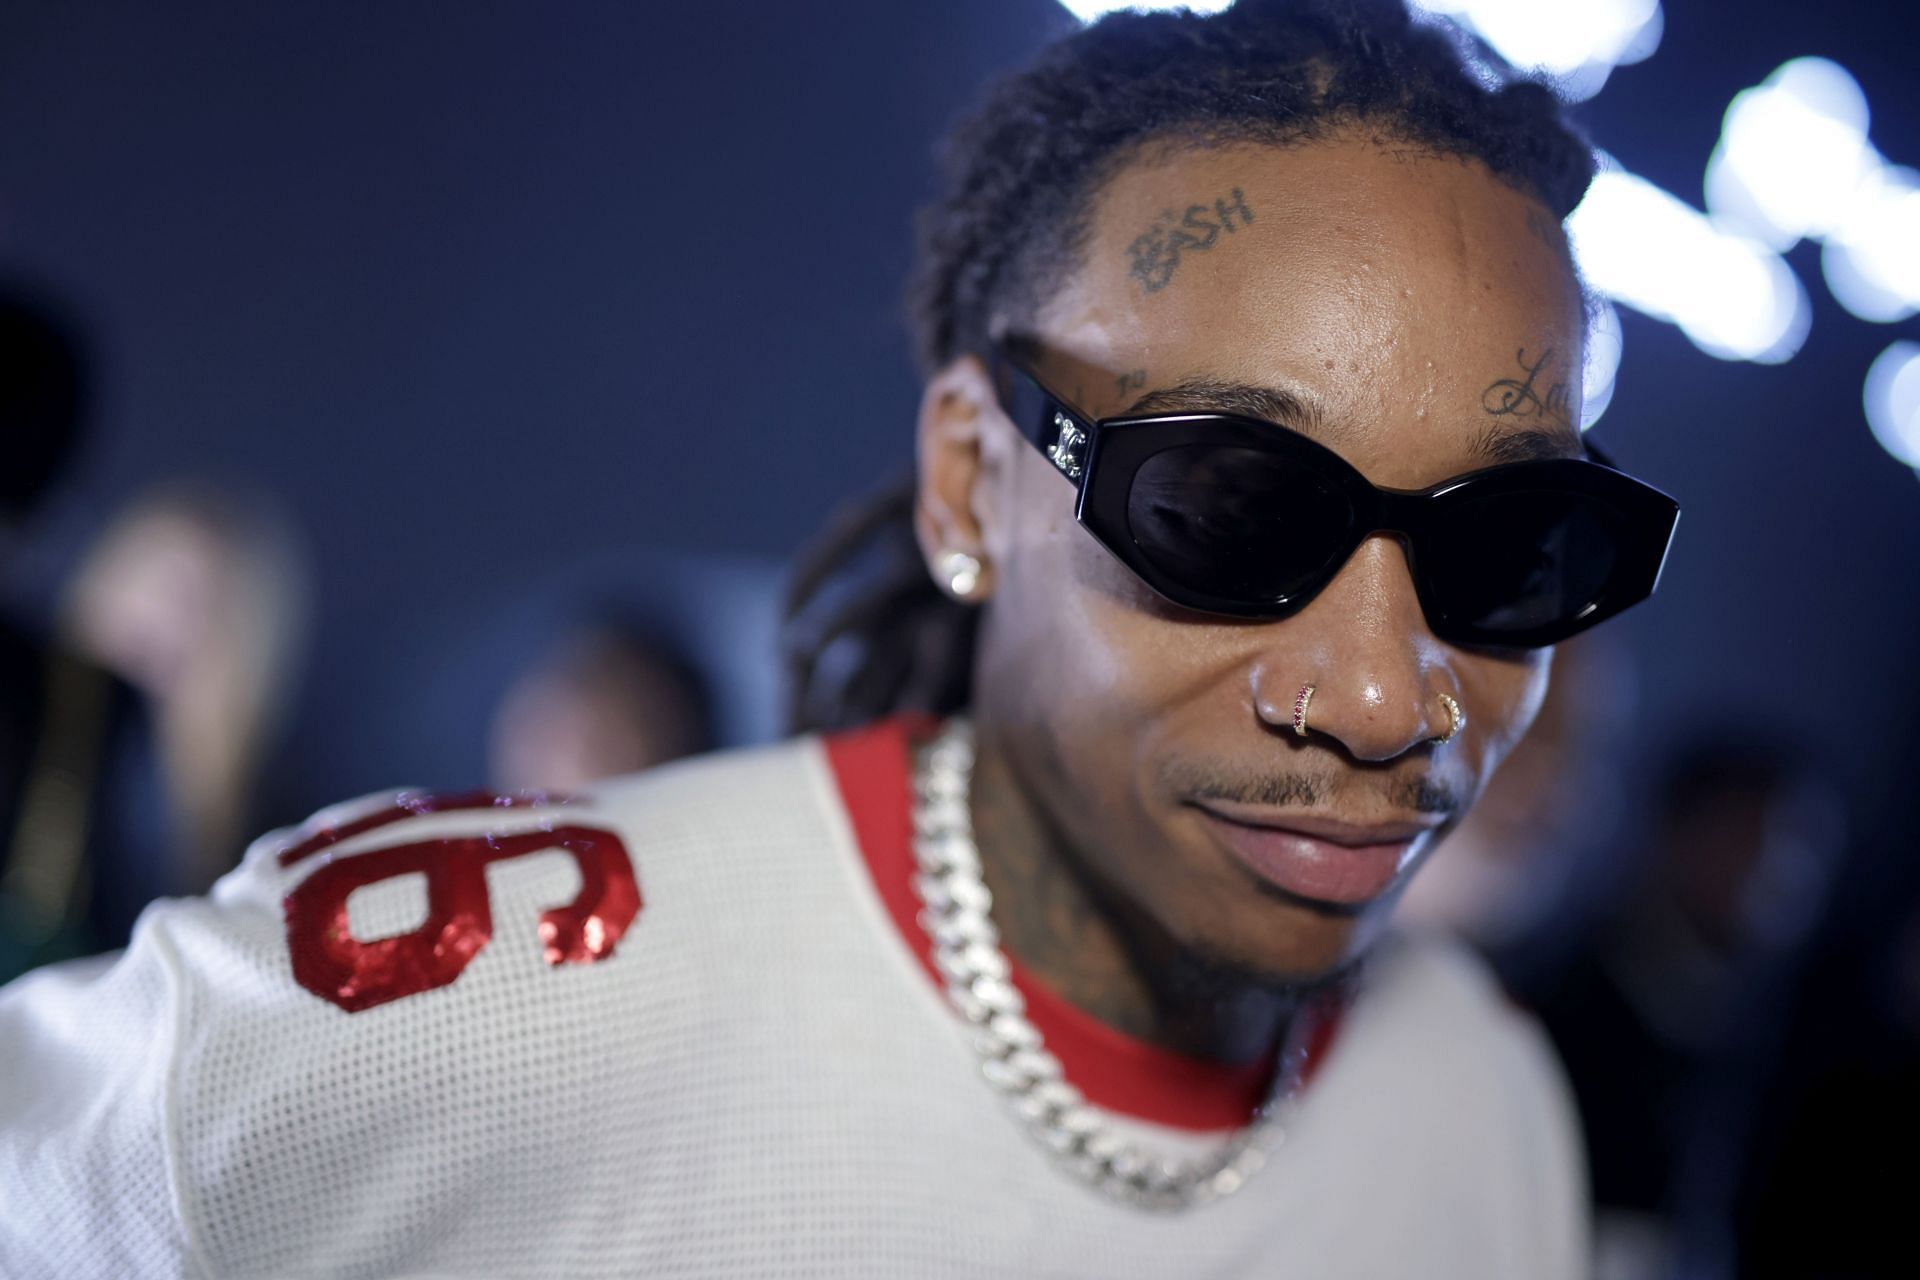 Wiz at the Warner Music Group Pre-Grammy Party. (Image via Getty/Greg Doherty)